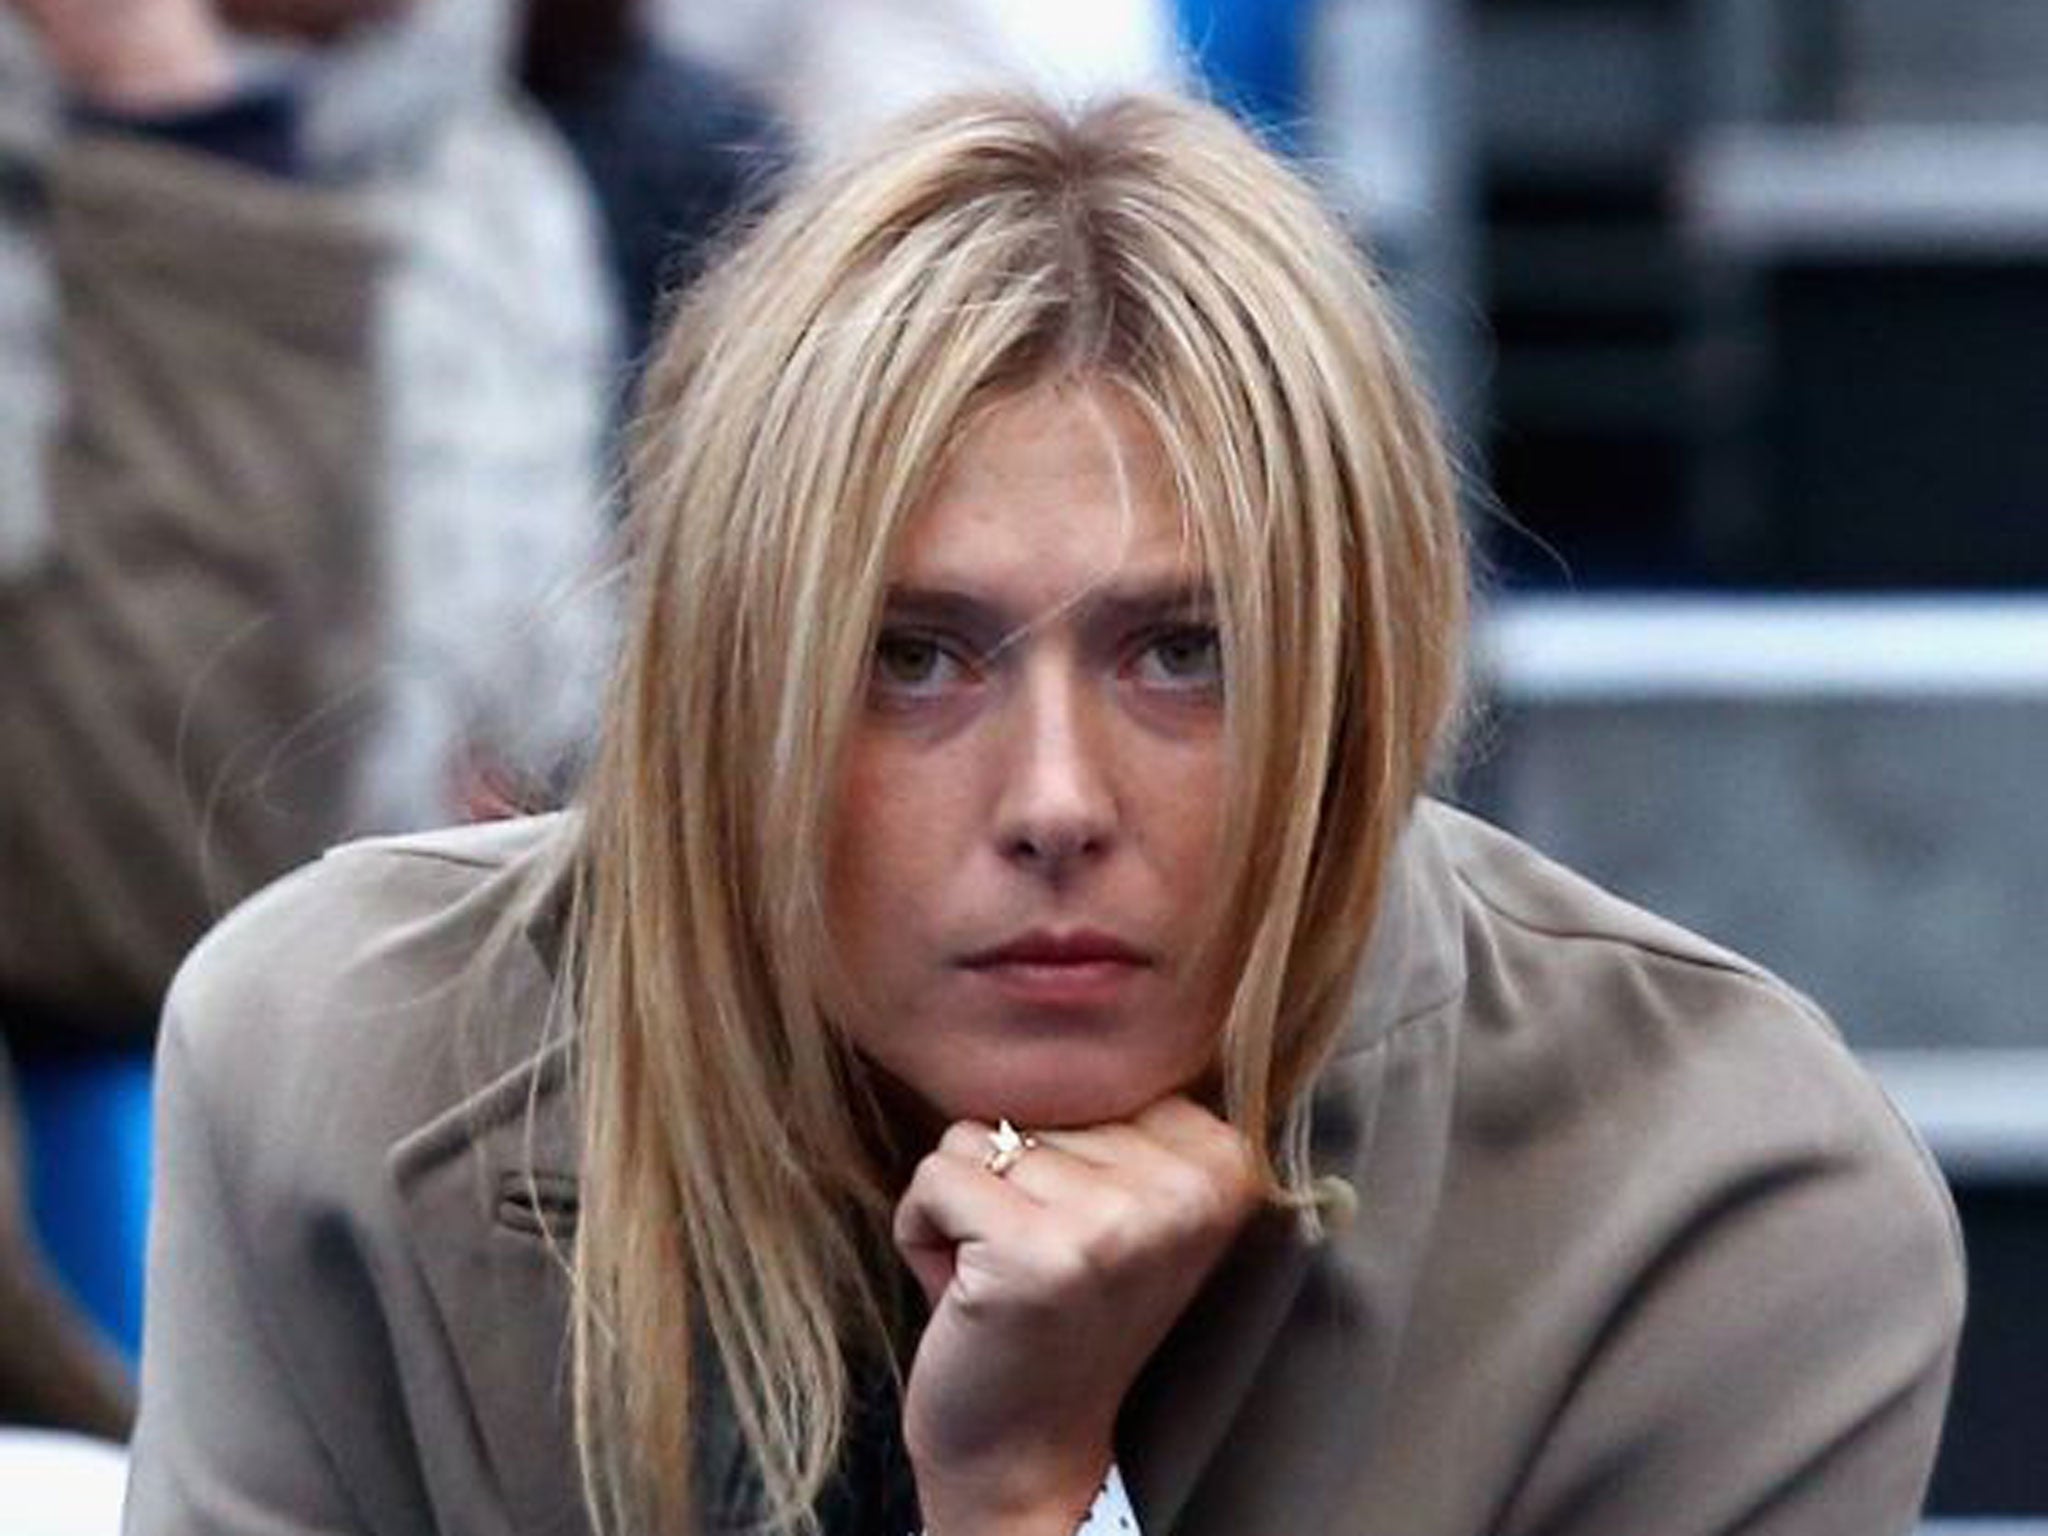 Pair-shaped: Sharapova watches boyfriend Dimitrov who allegedly had an affair with Williams who is allegedly now with Mouratoglou